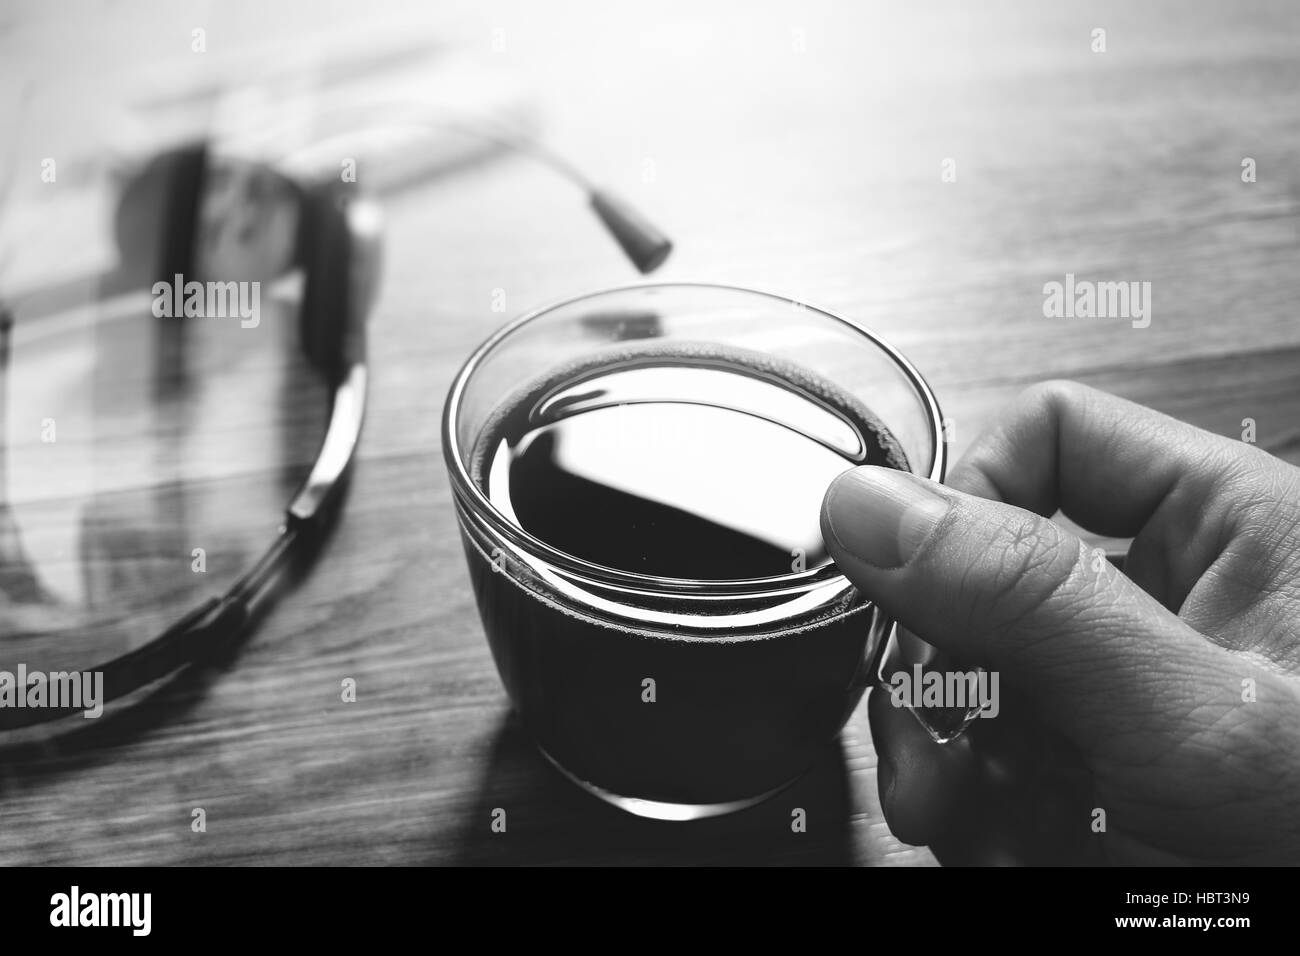 Hand holding Coffee cup or tea and voip headset,memo book on wooden table,filter effect,black white Stock Photo